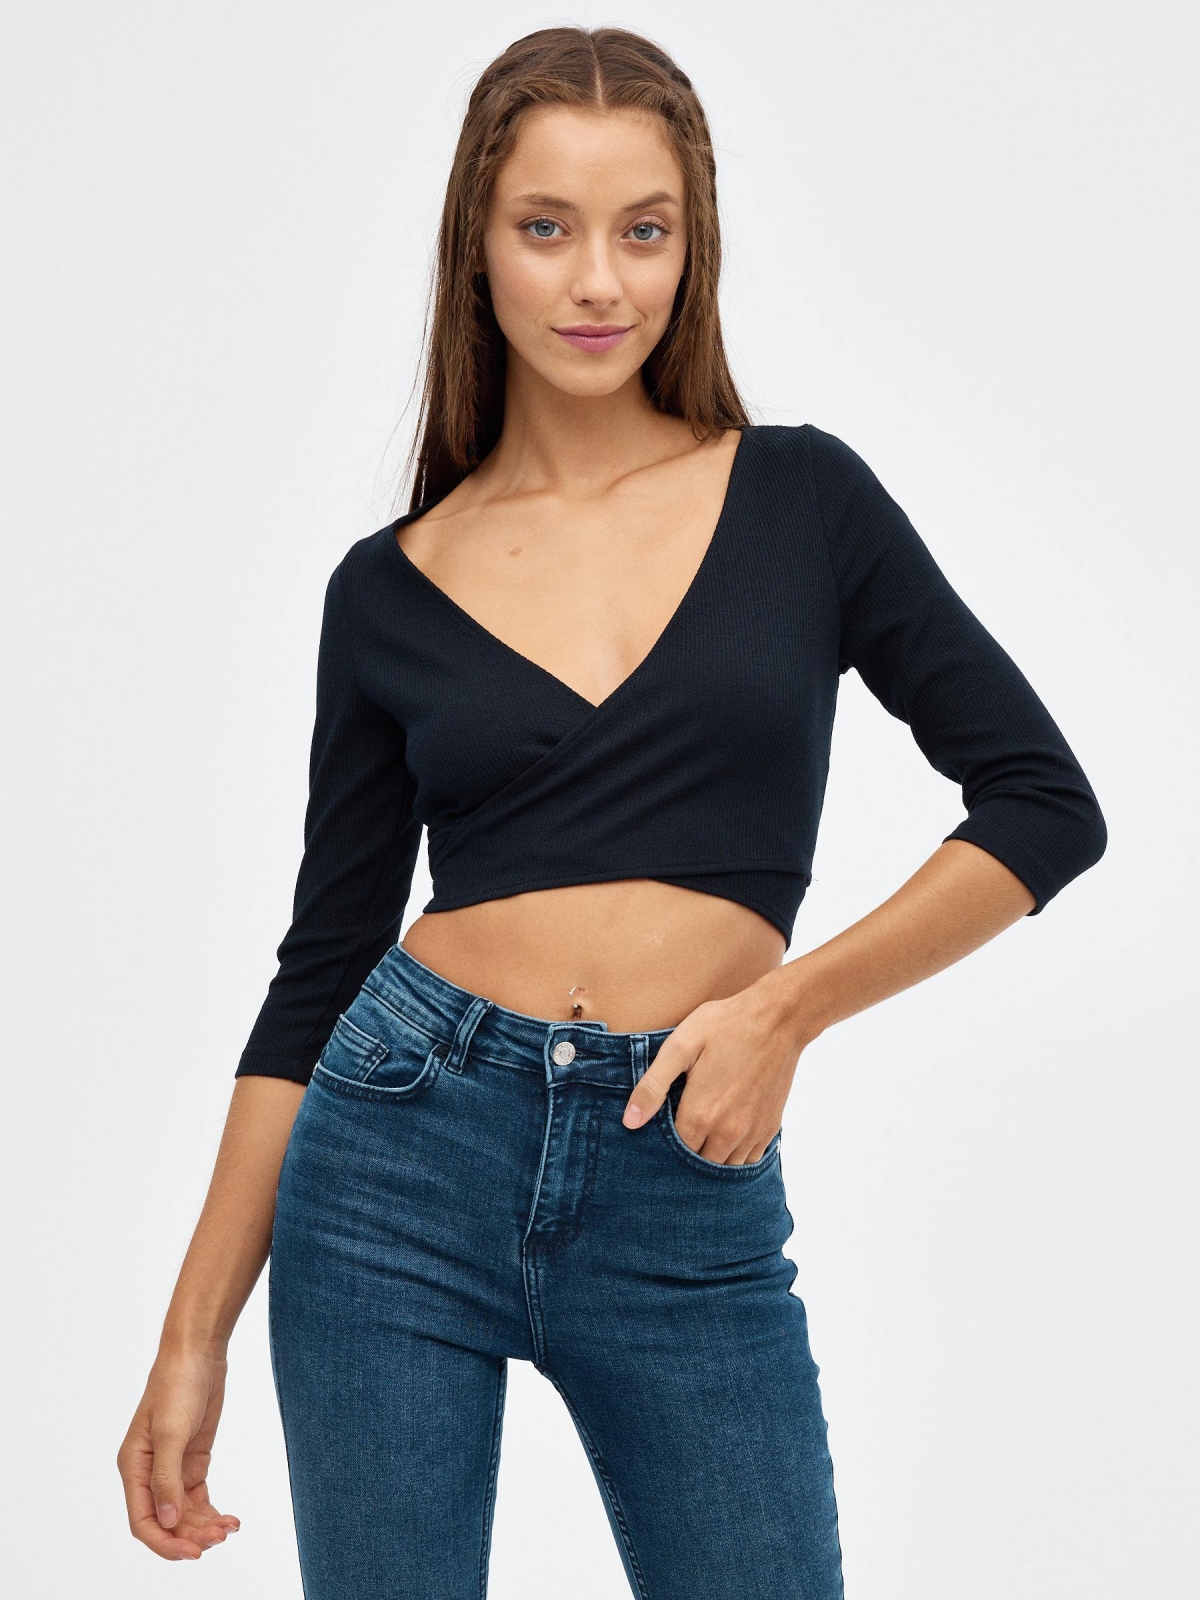 Crop top slim crossover black middle front view